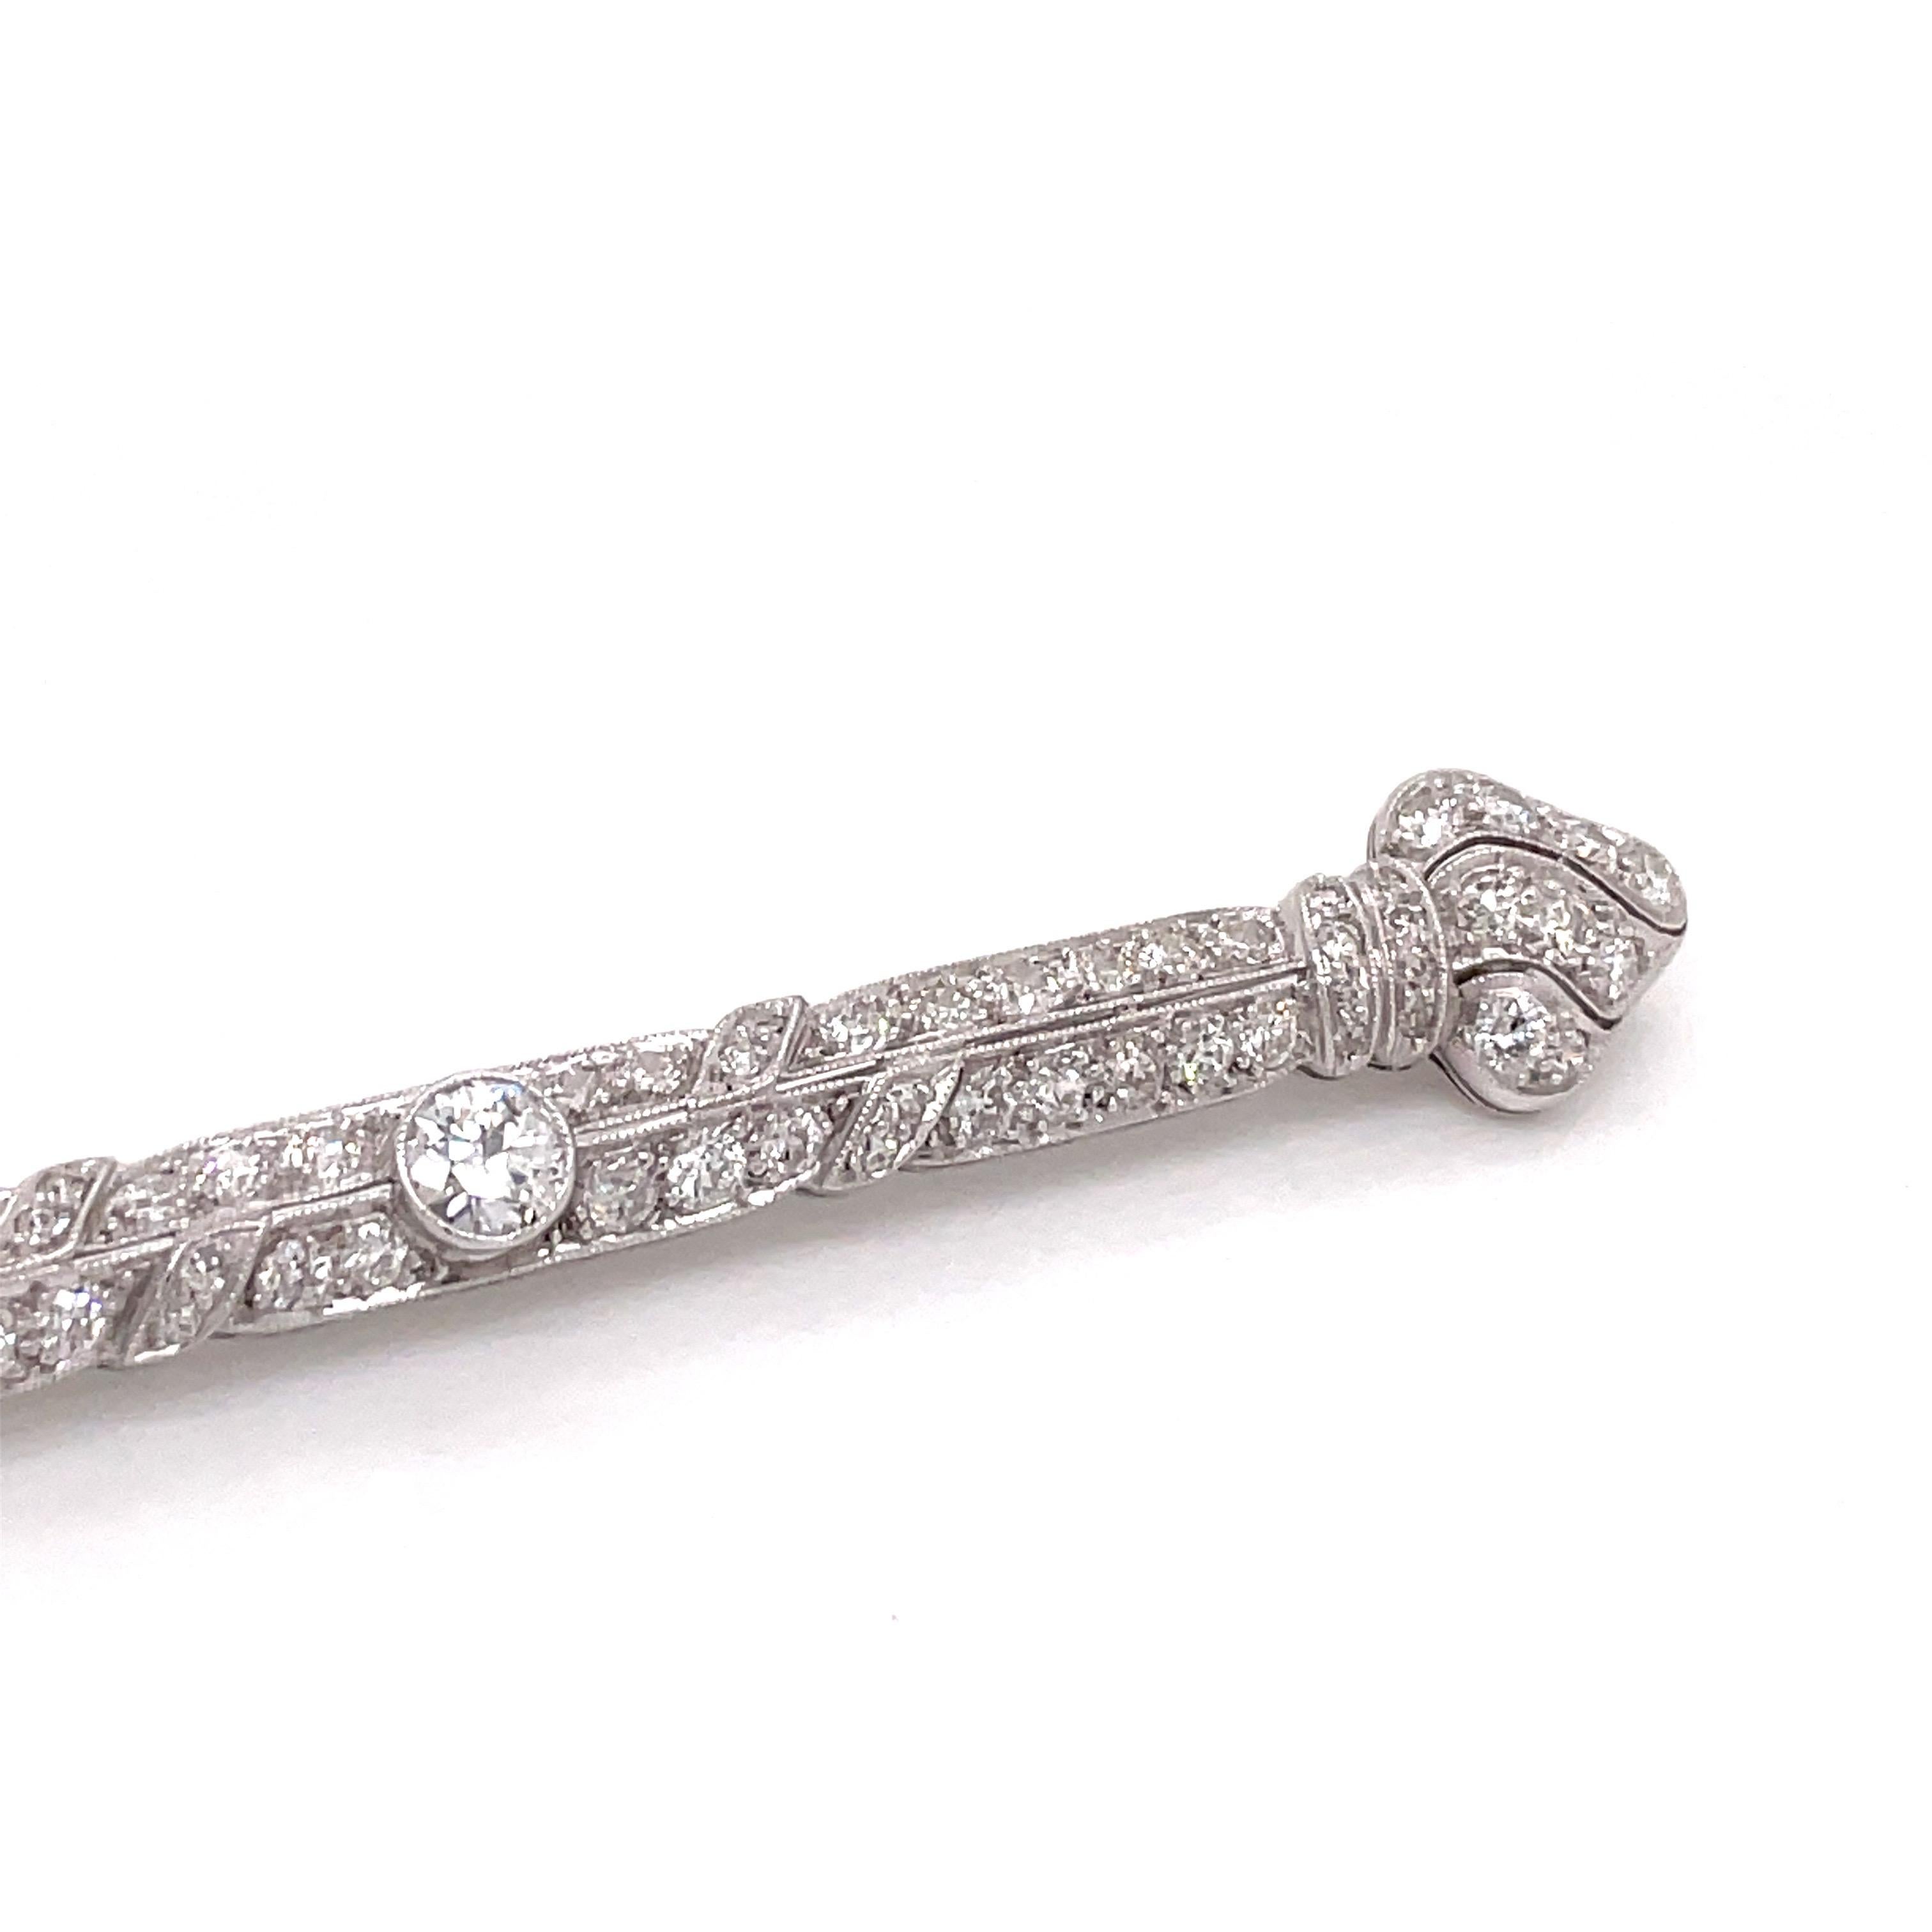 Antique Art Deco Platinum Diamond Bar Pin with Finials 2ct In Good Condition For Sale In Boston, MA